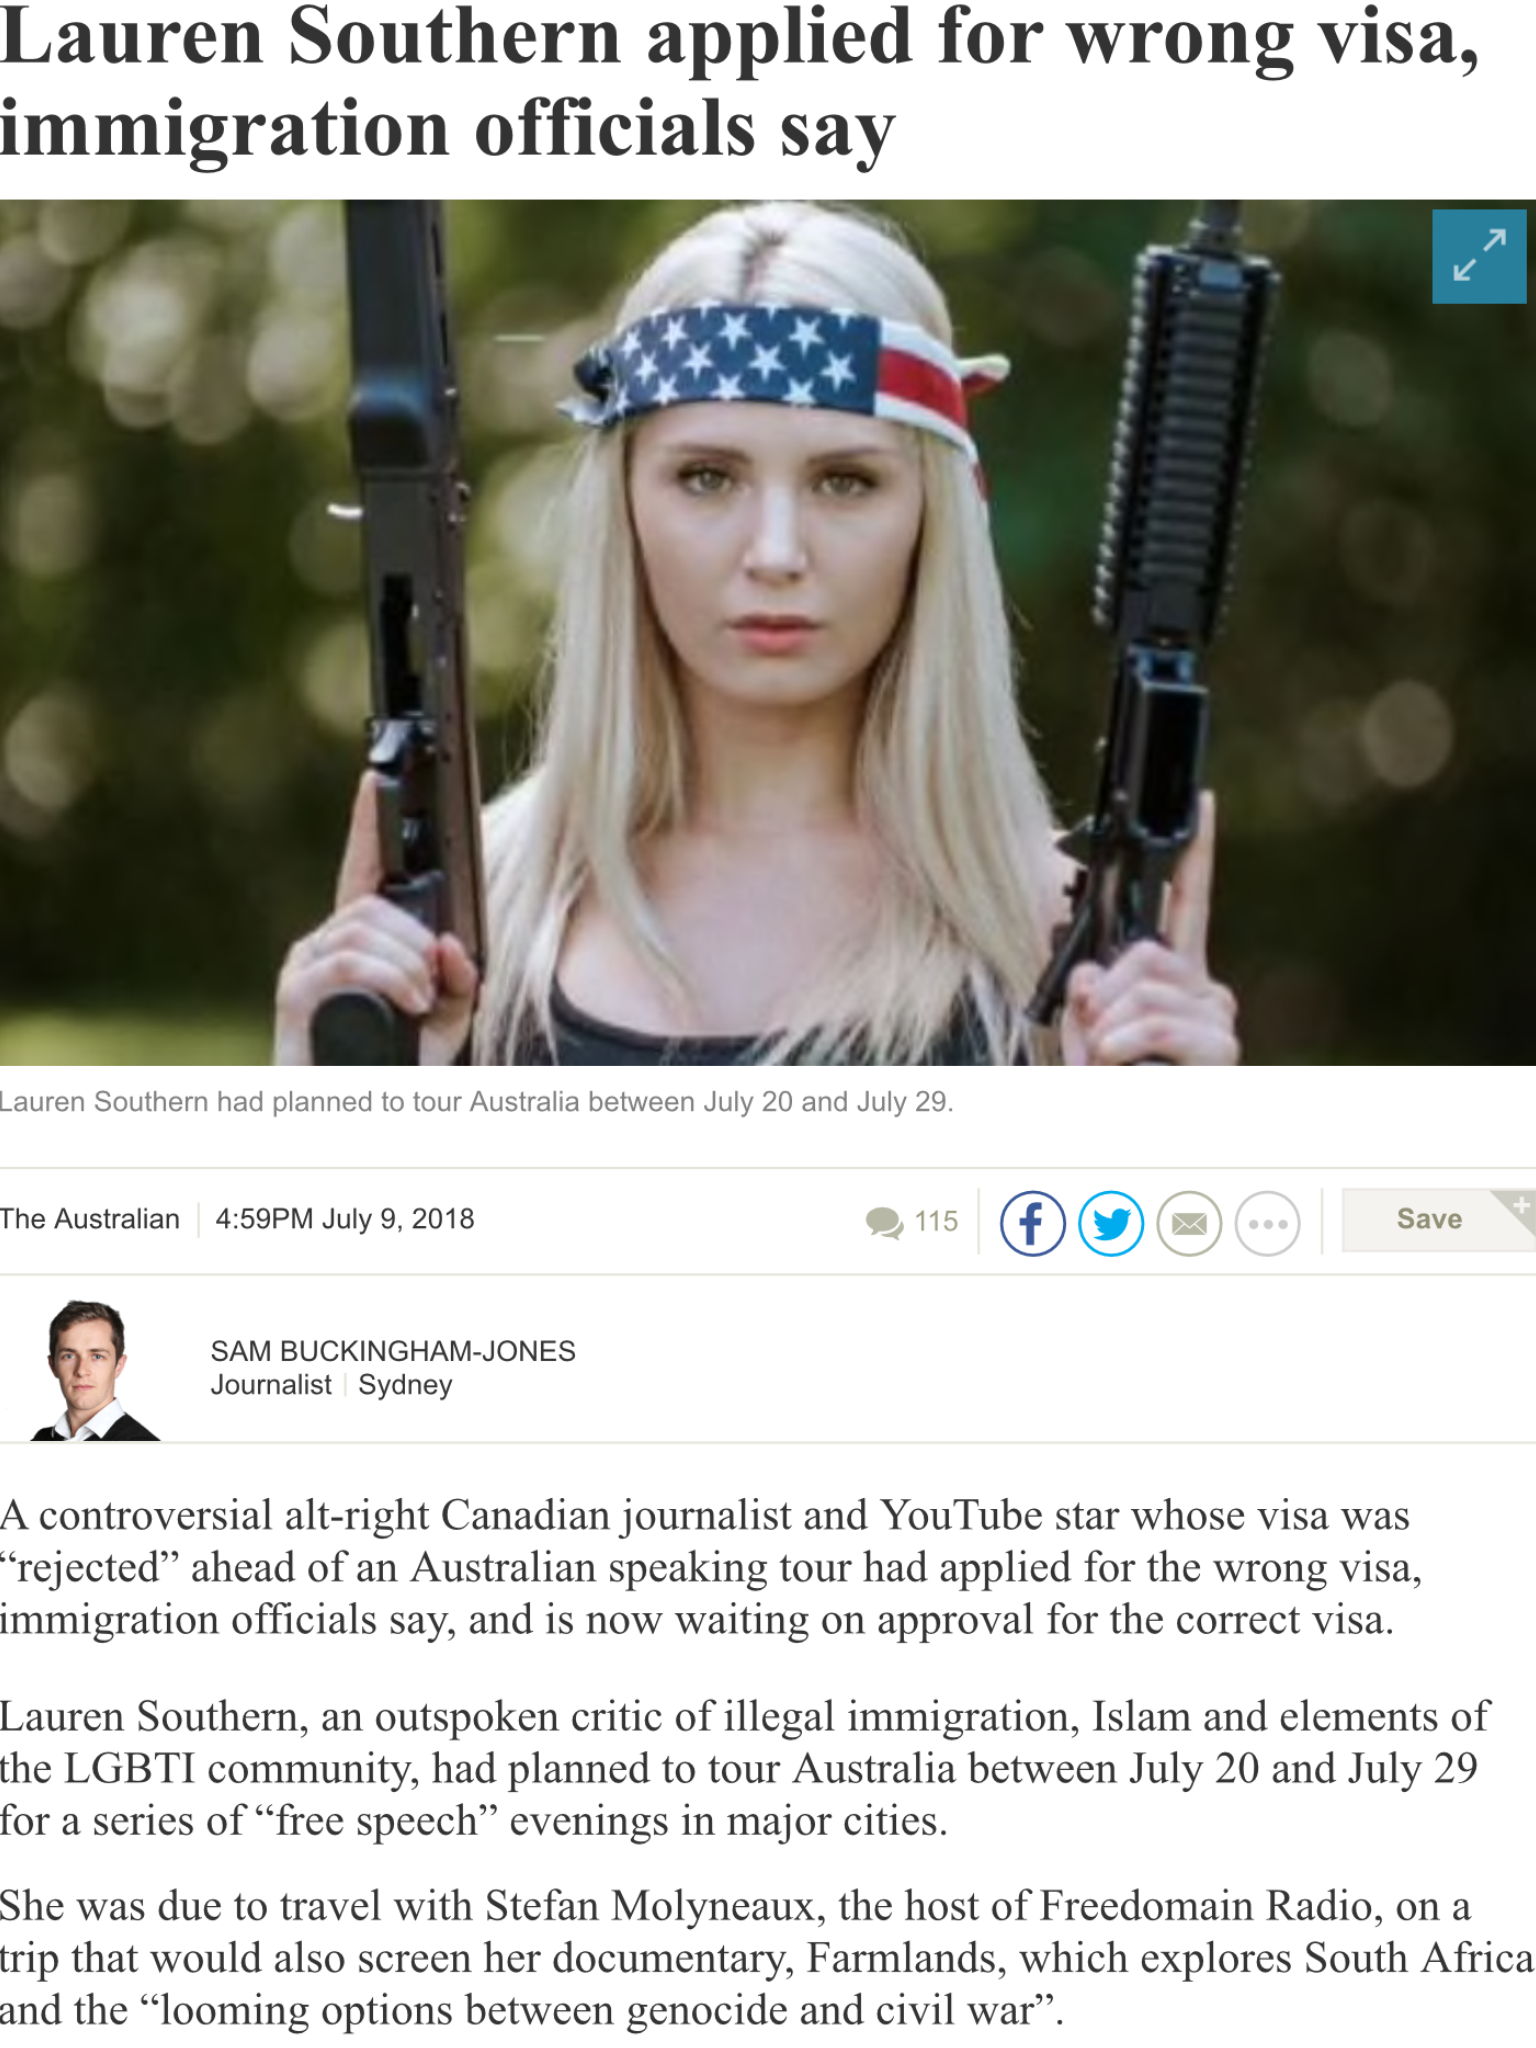 Fake News Watch: Lauren Southern did not apply for the wrong visa